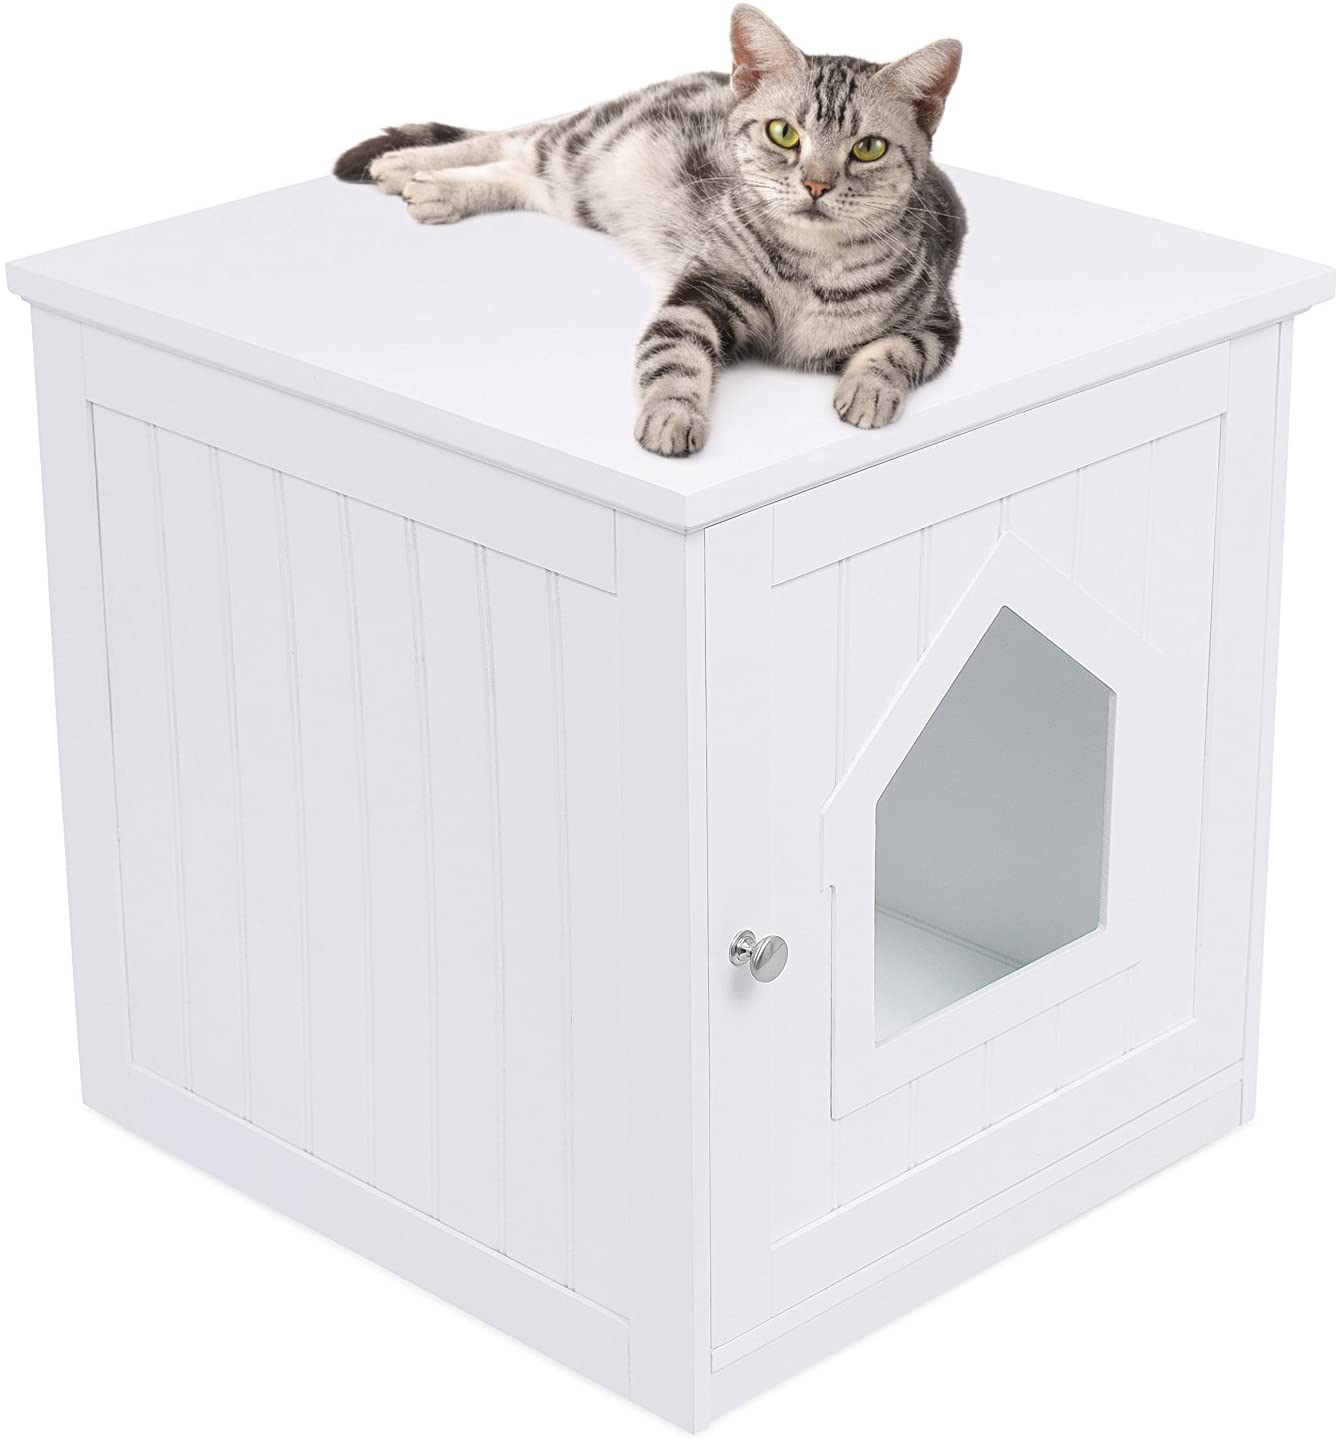 BIRDROCK Home Decorative Cat House & Side Table - Cat Home Nightstand - Indoor Pet Crate - Litter Box Enclosure - Hooded Hidden Pet Box - Cats Furniture Cabinet - Kitty Washroom - White